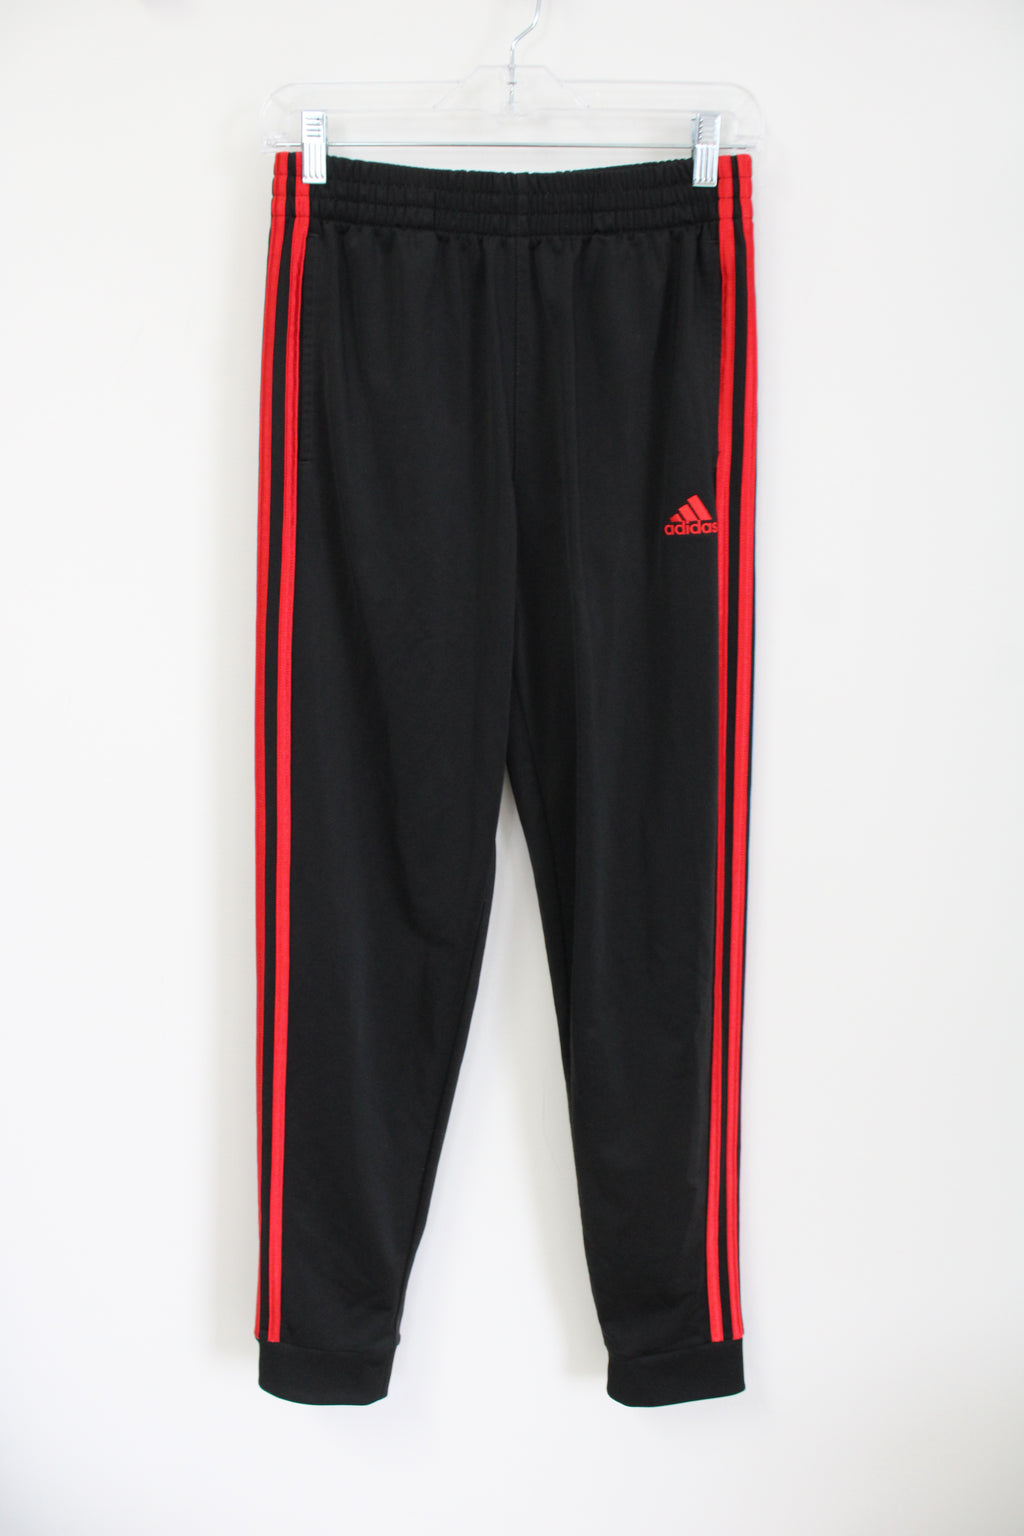 Adidas Black Red Tapered Track Pants | Youth L (14/16)